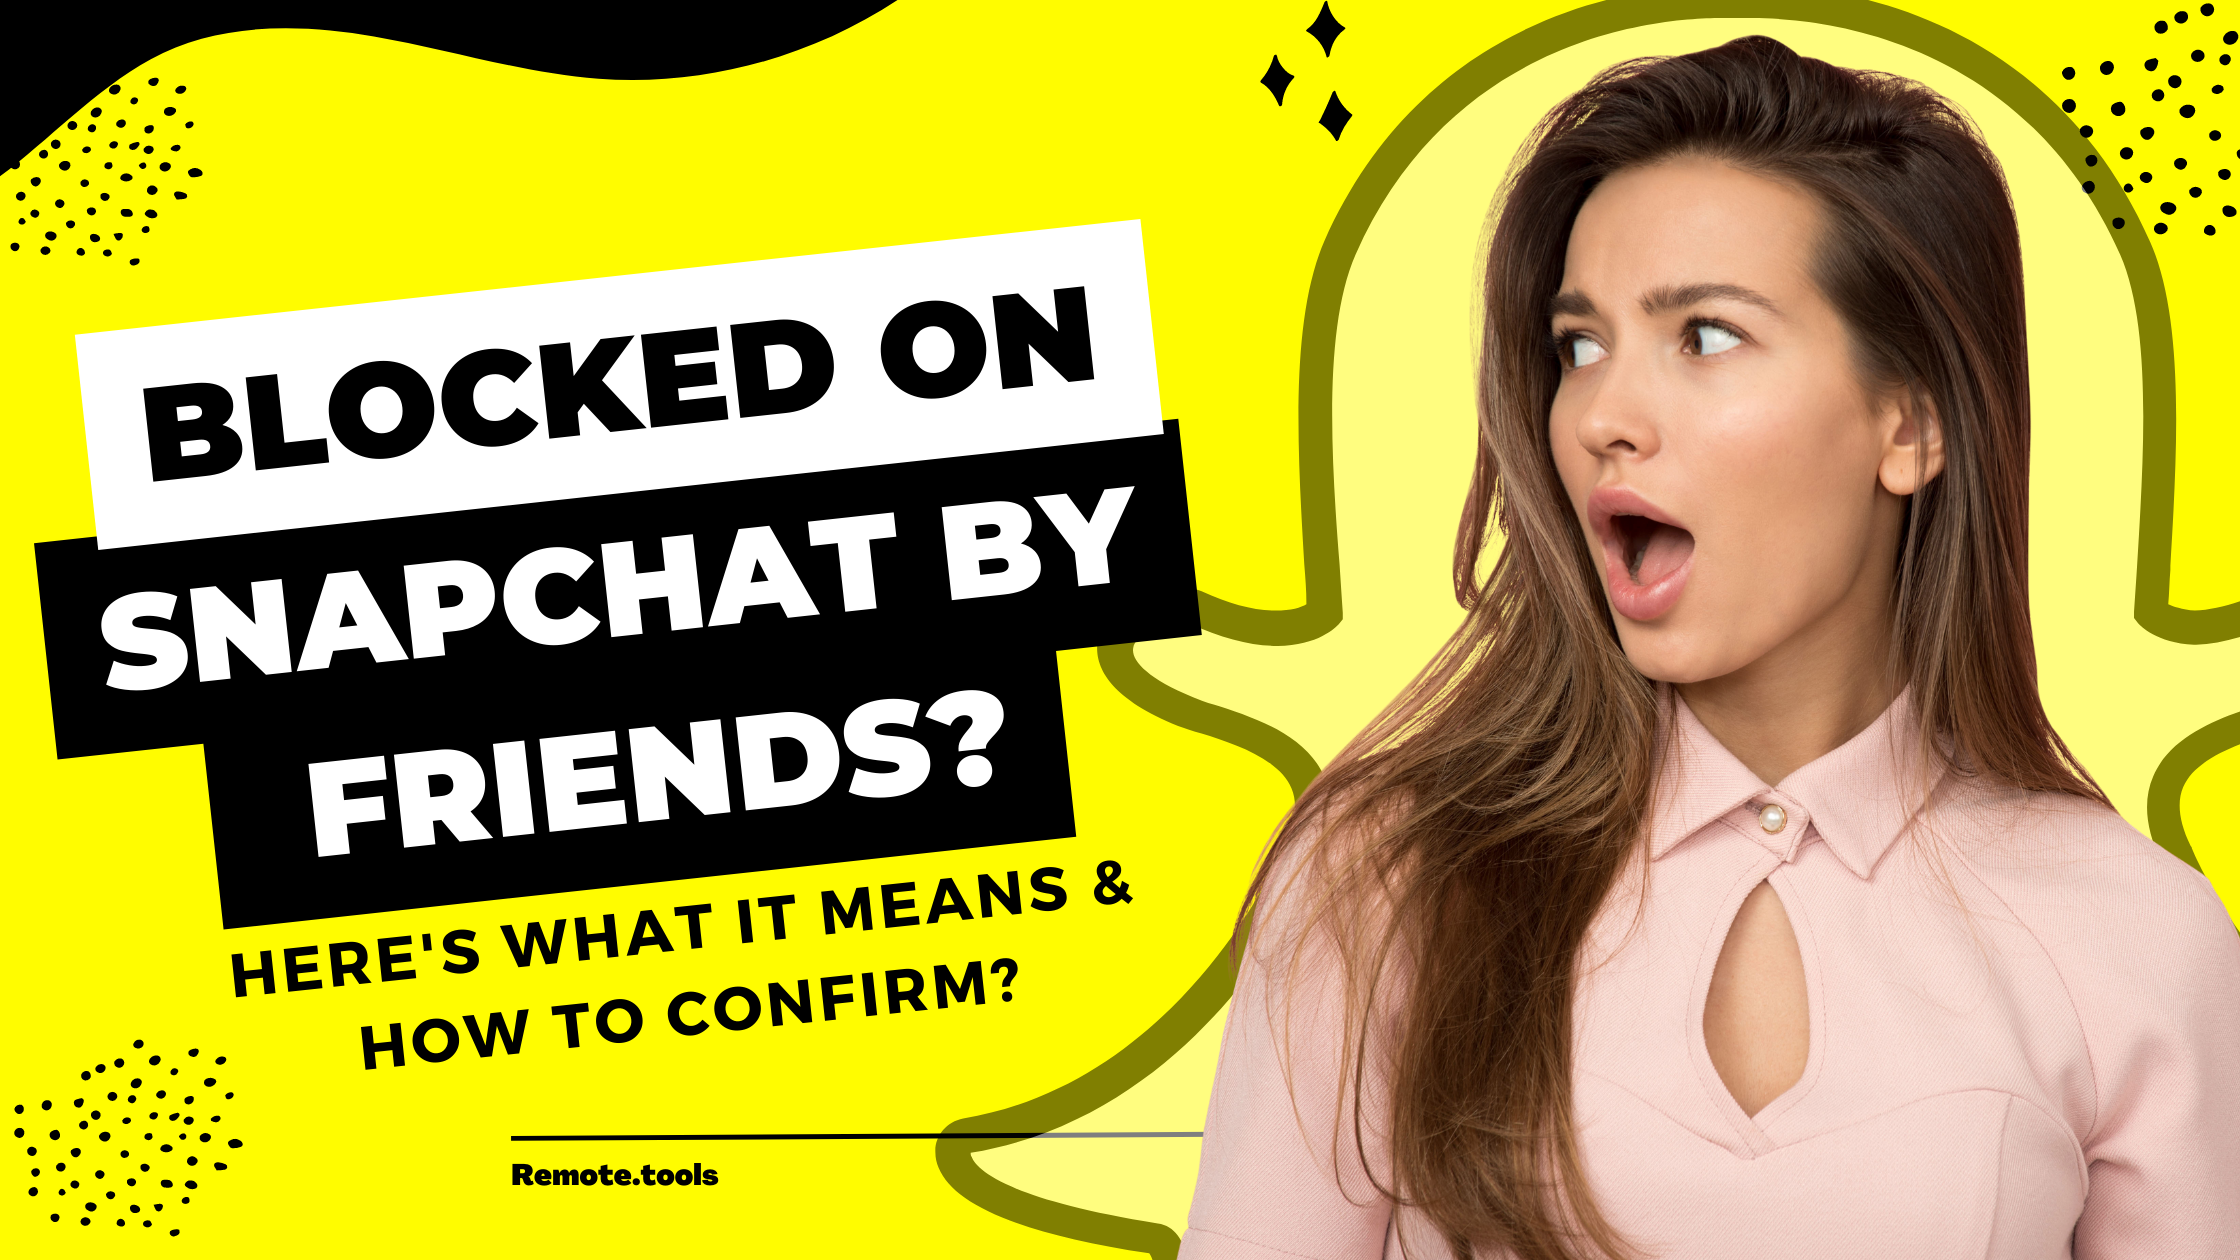 In this post, Remote.tools is discussing how to check if someone has blocked you on Snapchat